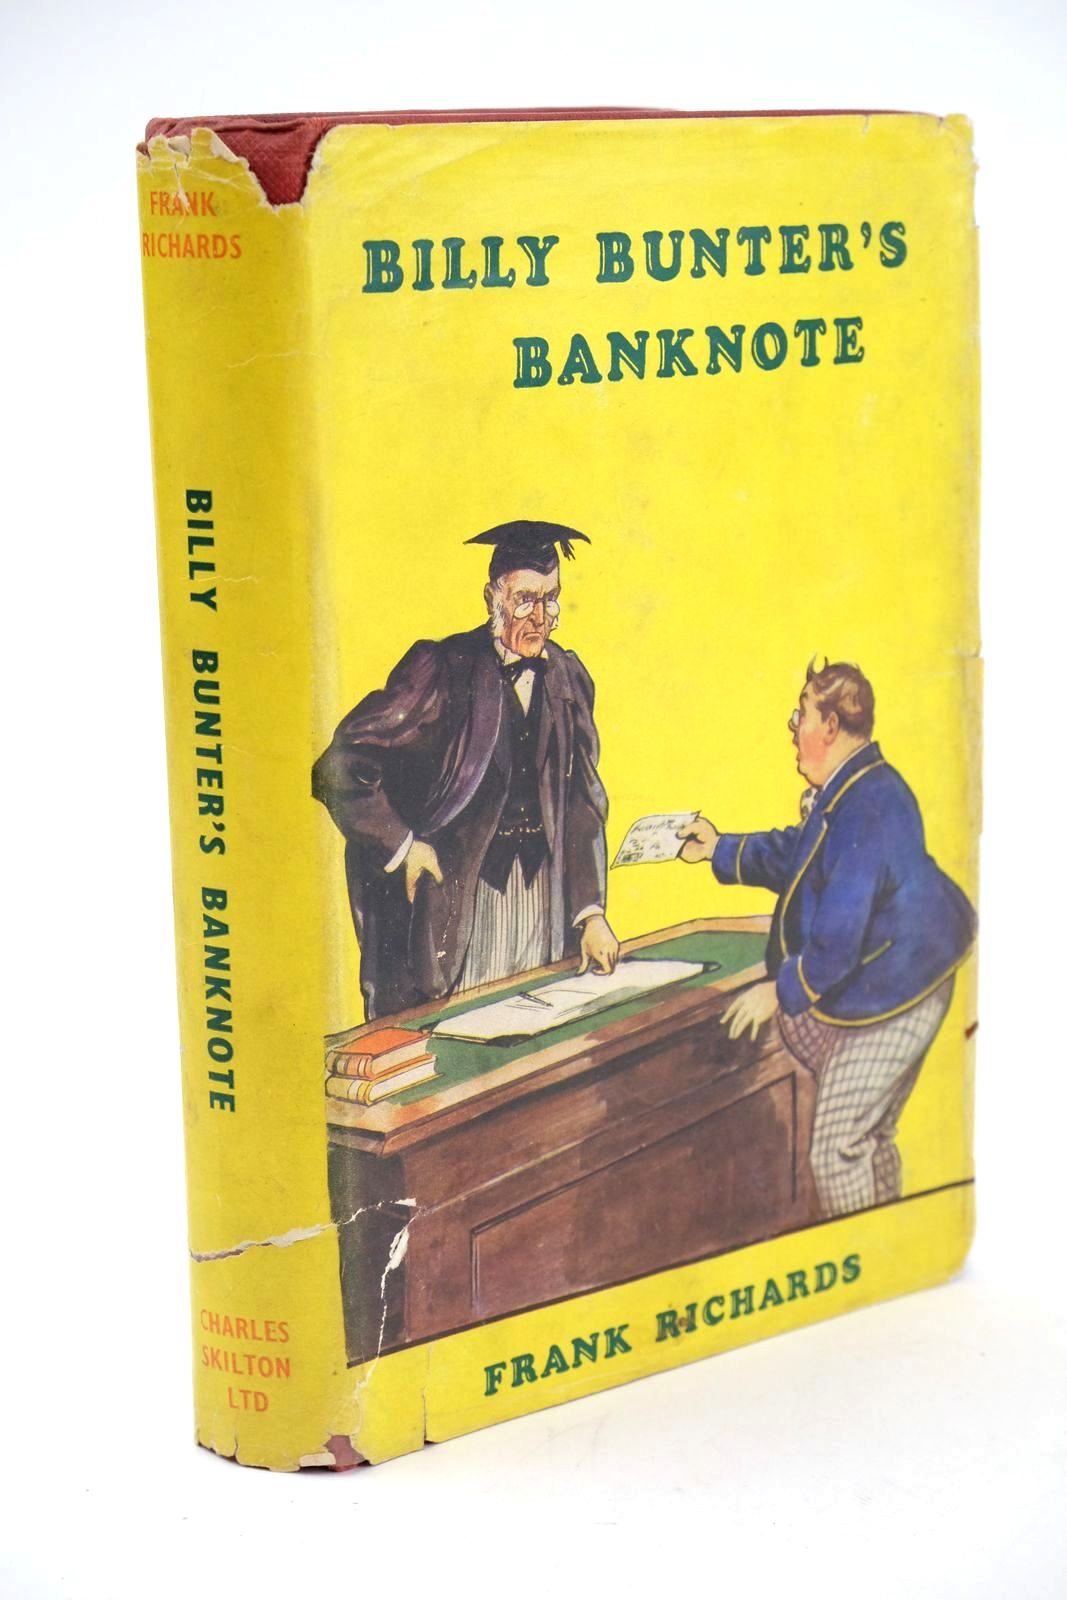 Photo of BILLY BUNTER'S BANKNOTE written by Richards, Frank illustrated by Macdonald, R.J. published by Charles Skilton Ltd. (STOCK CODE: 1324119)  for sale by Stella & Rose's Books